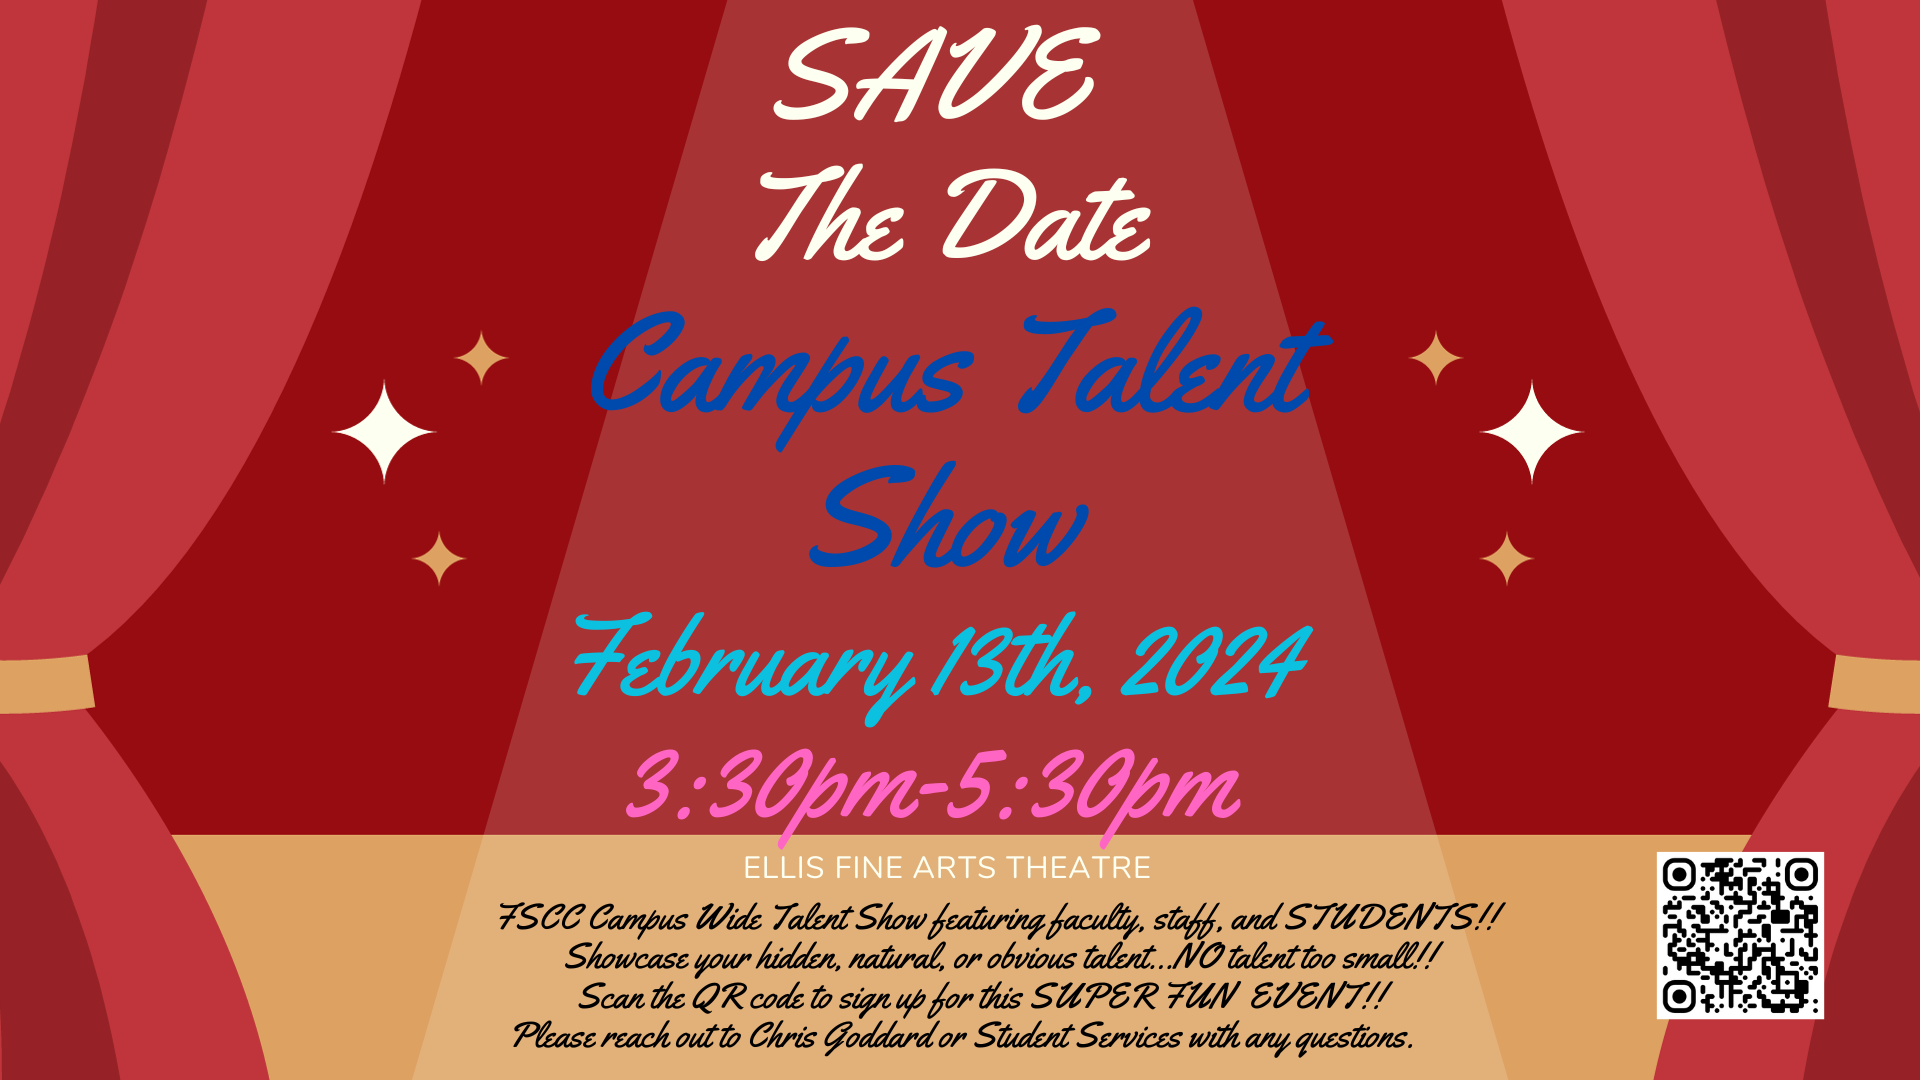 Save the Date. Campus Talent Show. Feb. 13th, 2024. 3:30 - 5:30pm. ELLIS FINE ARTS THEATRE FSCC Campus Wide Talent Show featuring faculty, staff, and STUDENTS!! Showcase your hidden, natural, or obvious talent...NO talent too small!! Scan the QR code to sign up for this SUPER FUN EVENT!! Please reach out to Chris Goddard or Student Services with any questions.